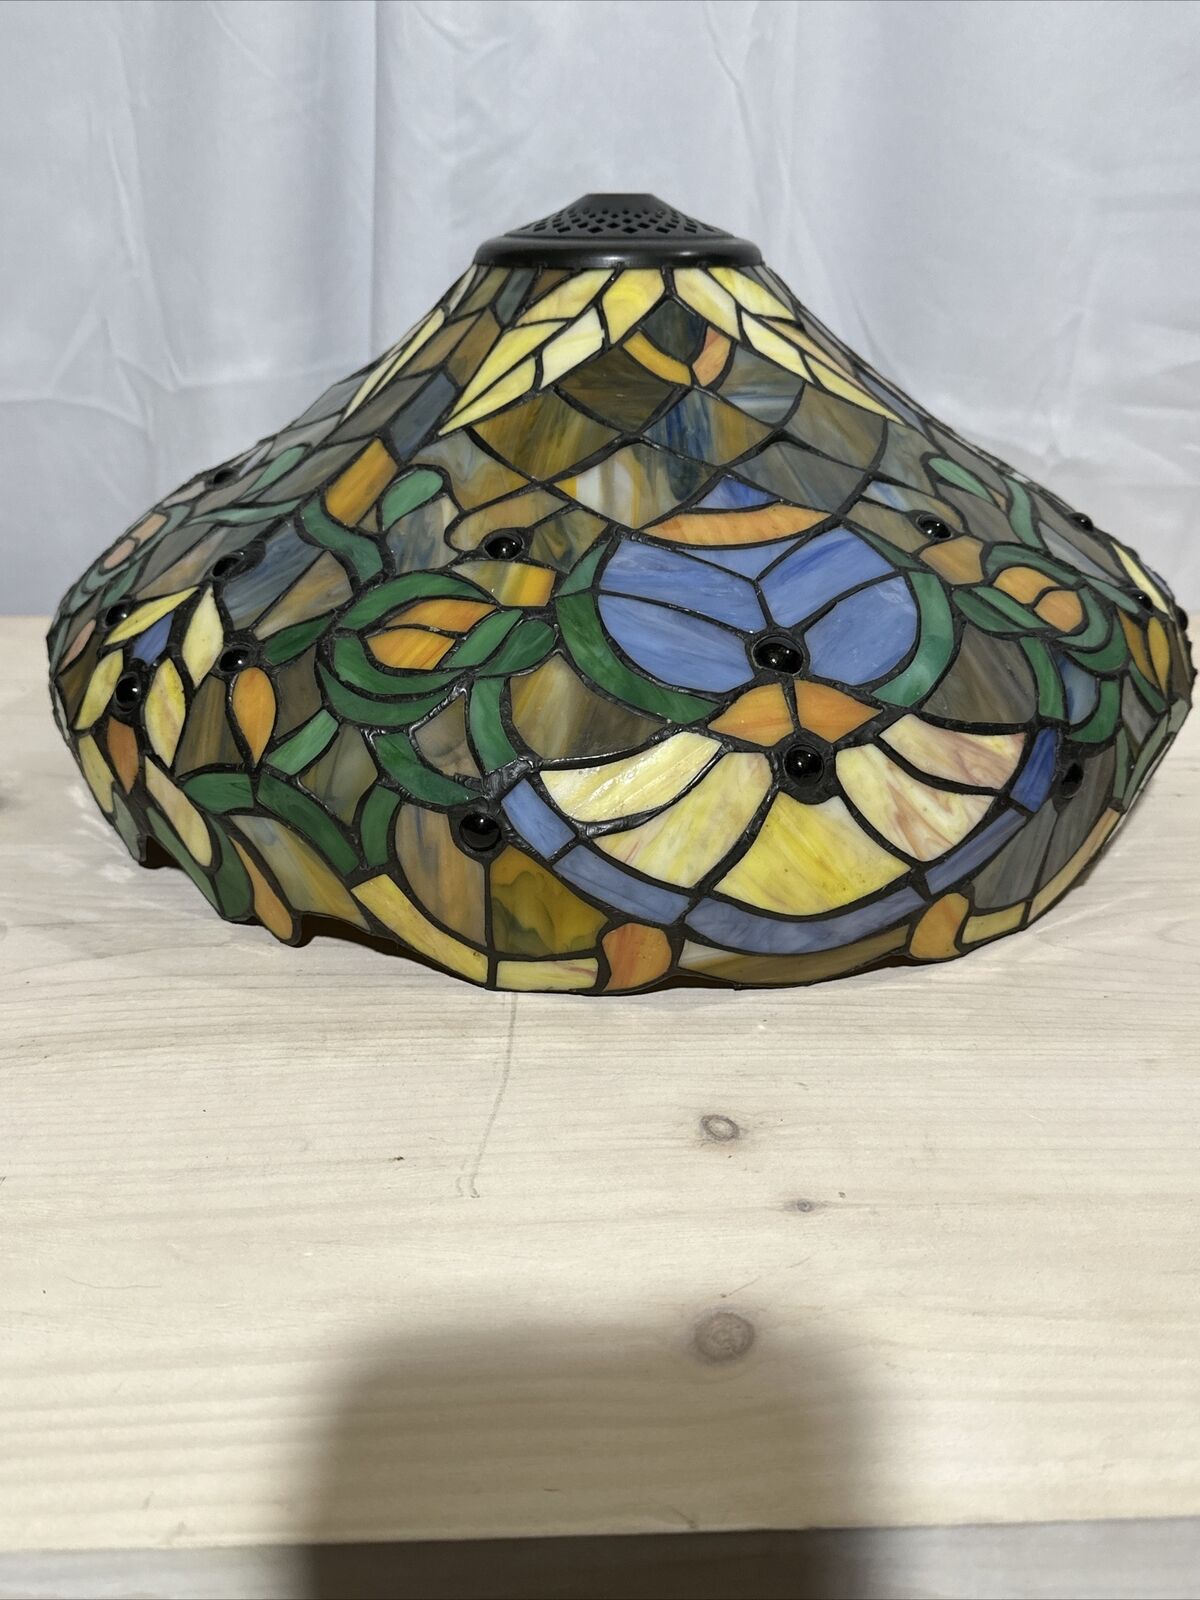 Vintage Tiffany Style Lamp Shade Stained Glass 15x7”